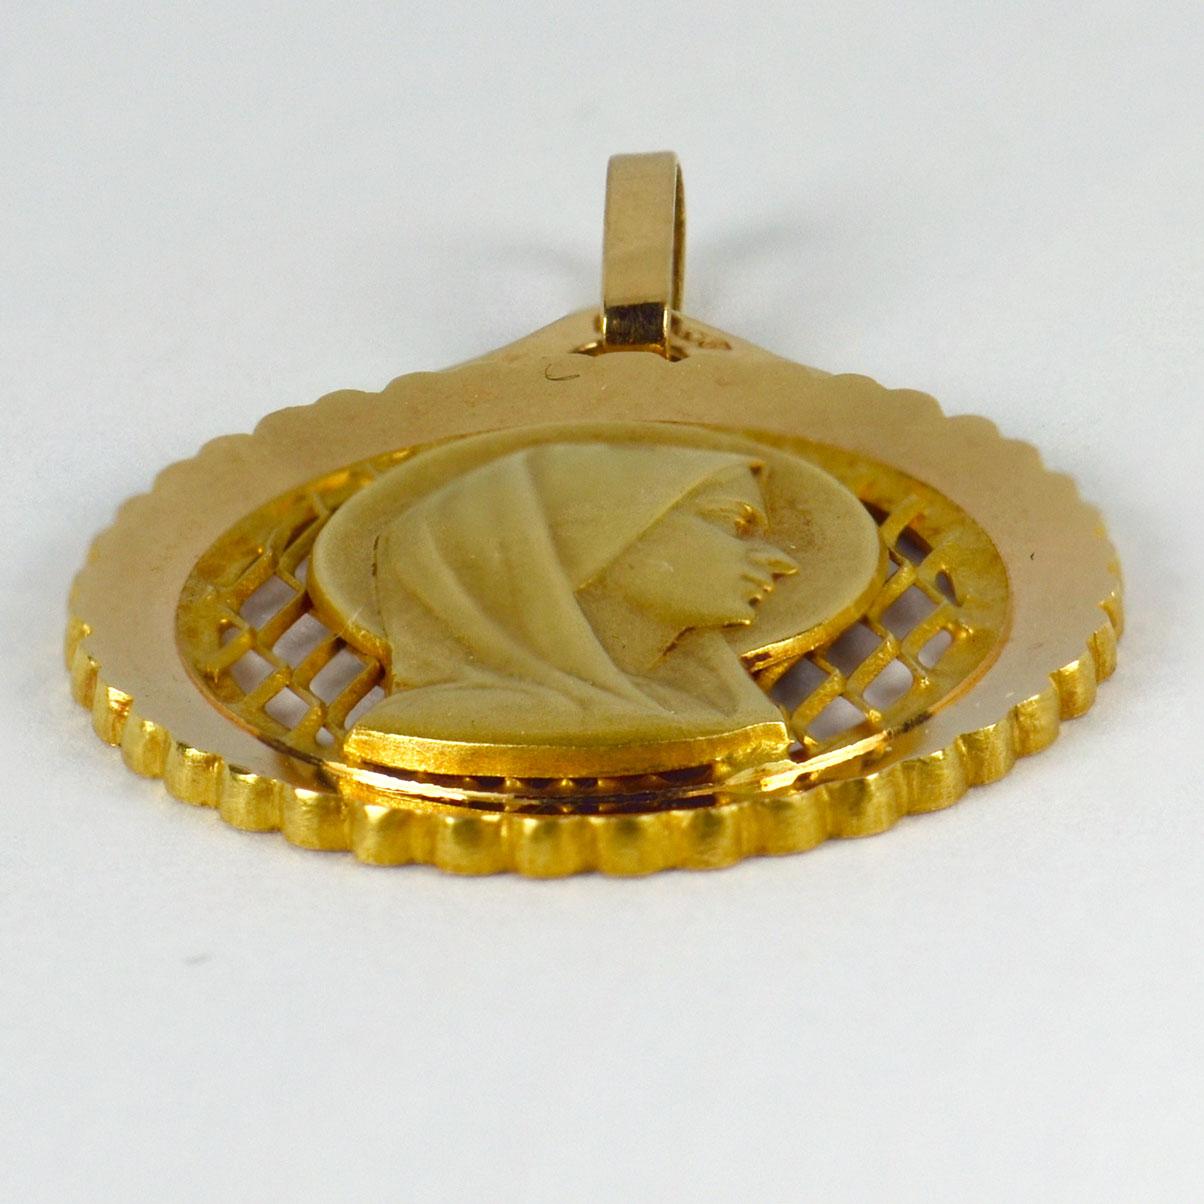 An 18 karat (18K) yellow gold pendant designed as a medal depicting the Virgin Mary against a pierced fretwork ground. Stamped with the eagle’s head for French manufacture and 18 karat gold, with maker’s mark for Grard of Nice.

Dimensions: 2.2 x